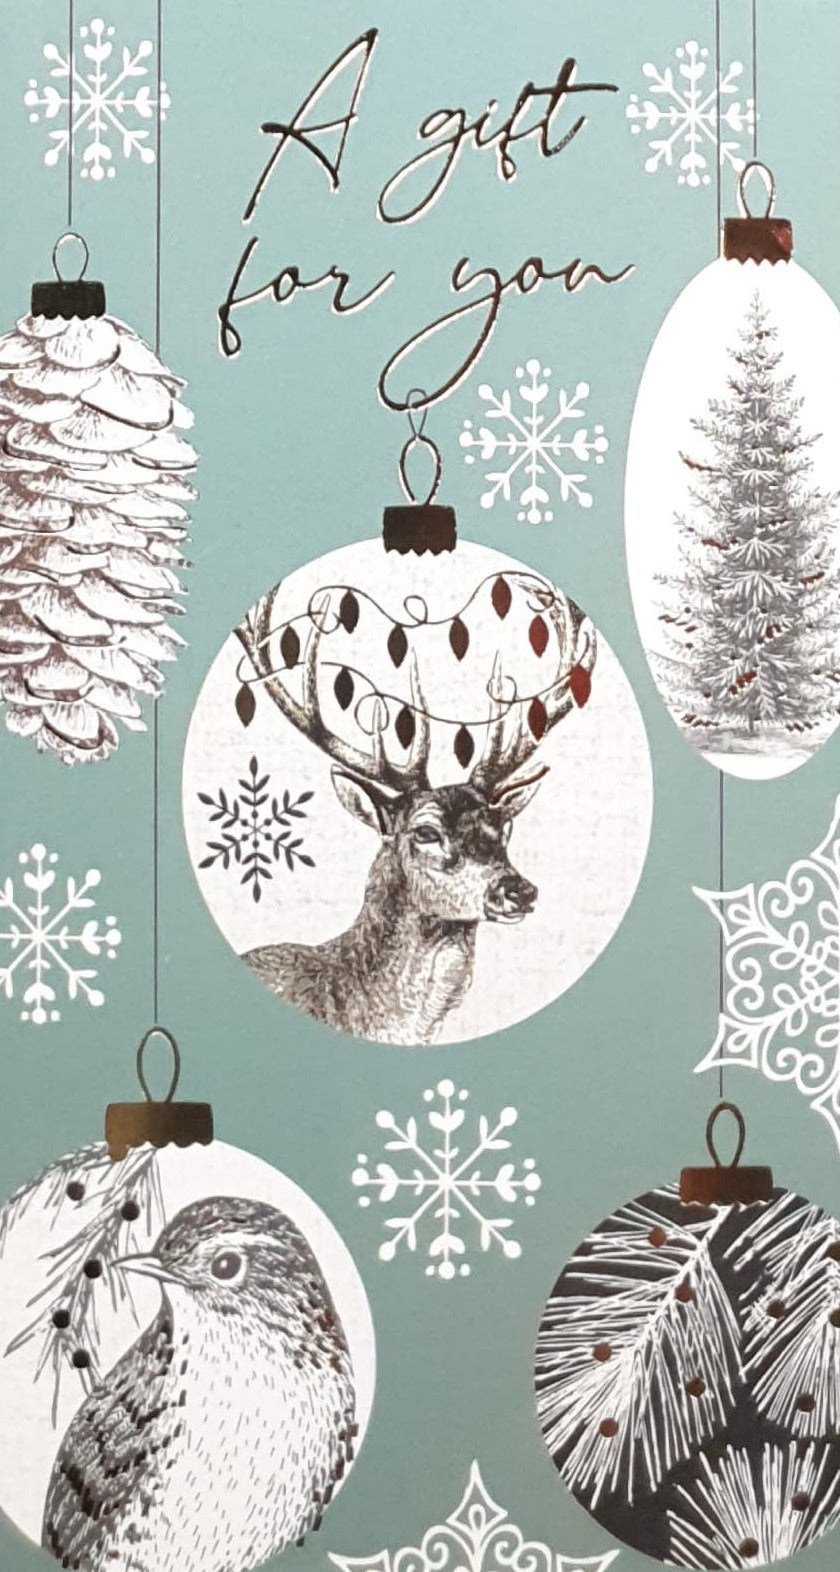 Money Wallet Christmas Card - A Gift For You / Deer & Bird & Trees in White Baubles